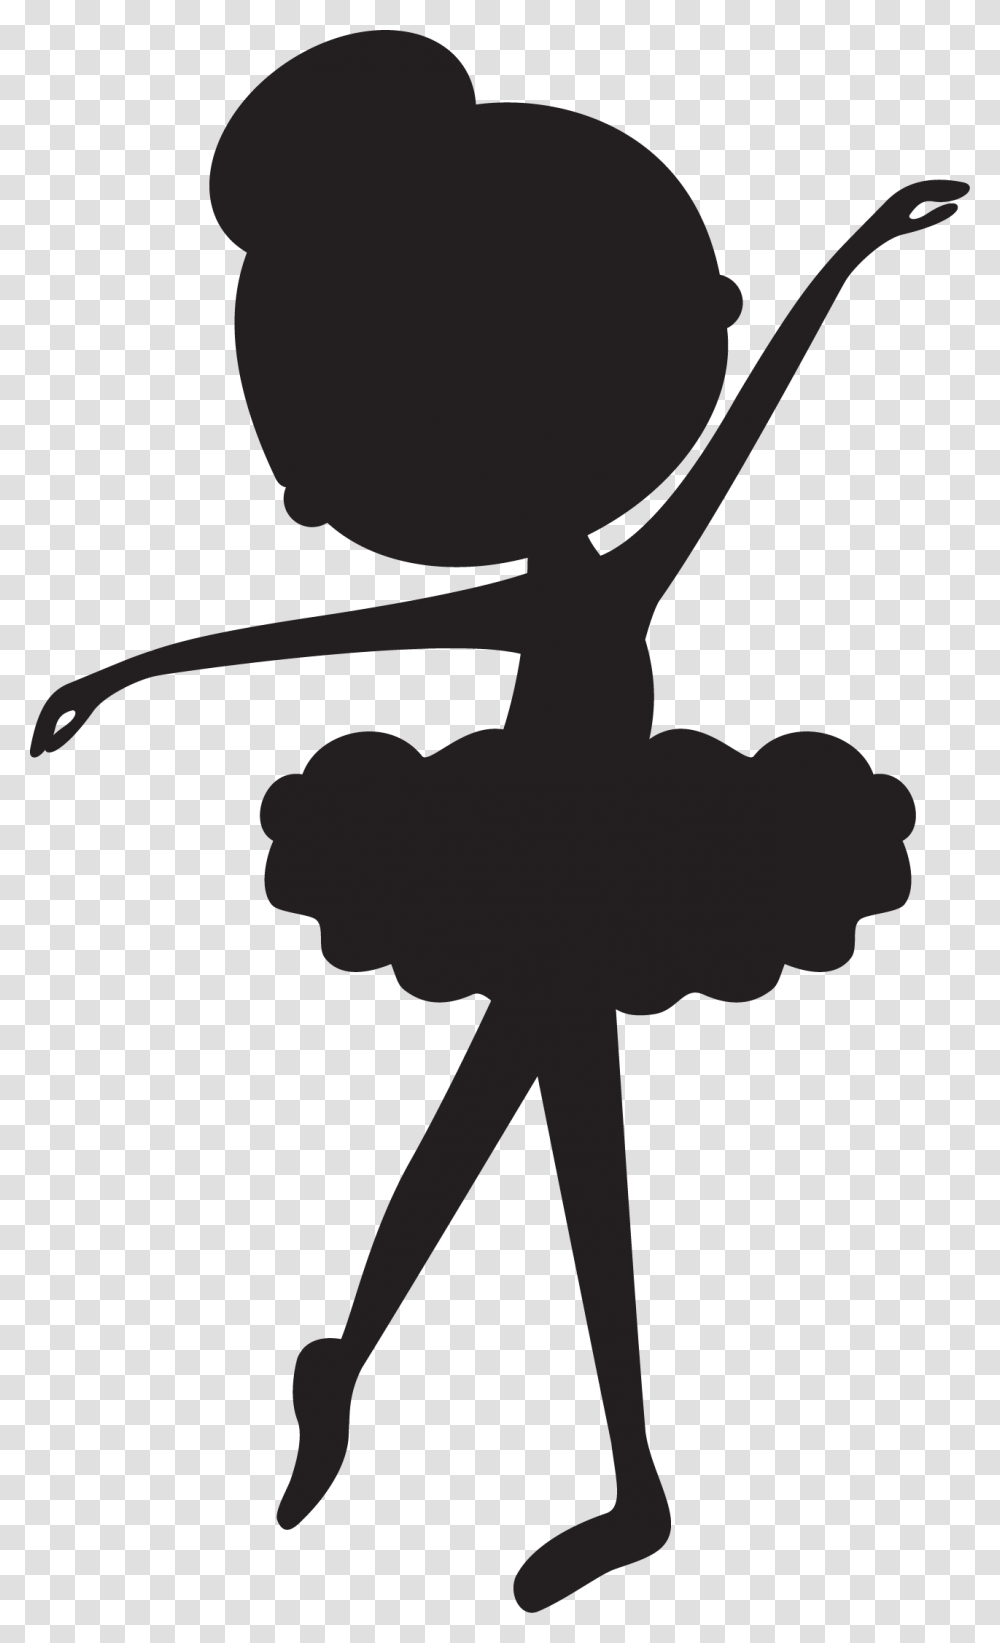 Silhouette Ornaments Por Cookies Baby Ballerina Silhouette, Plant, Tree, Pillow, Cushion Transparent Png